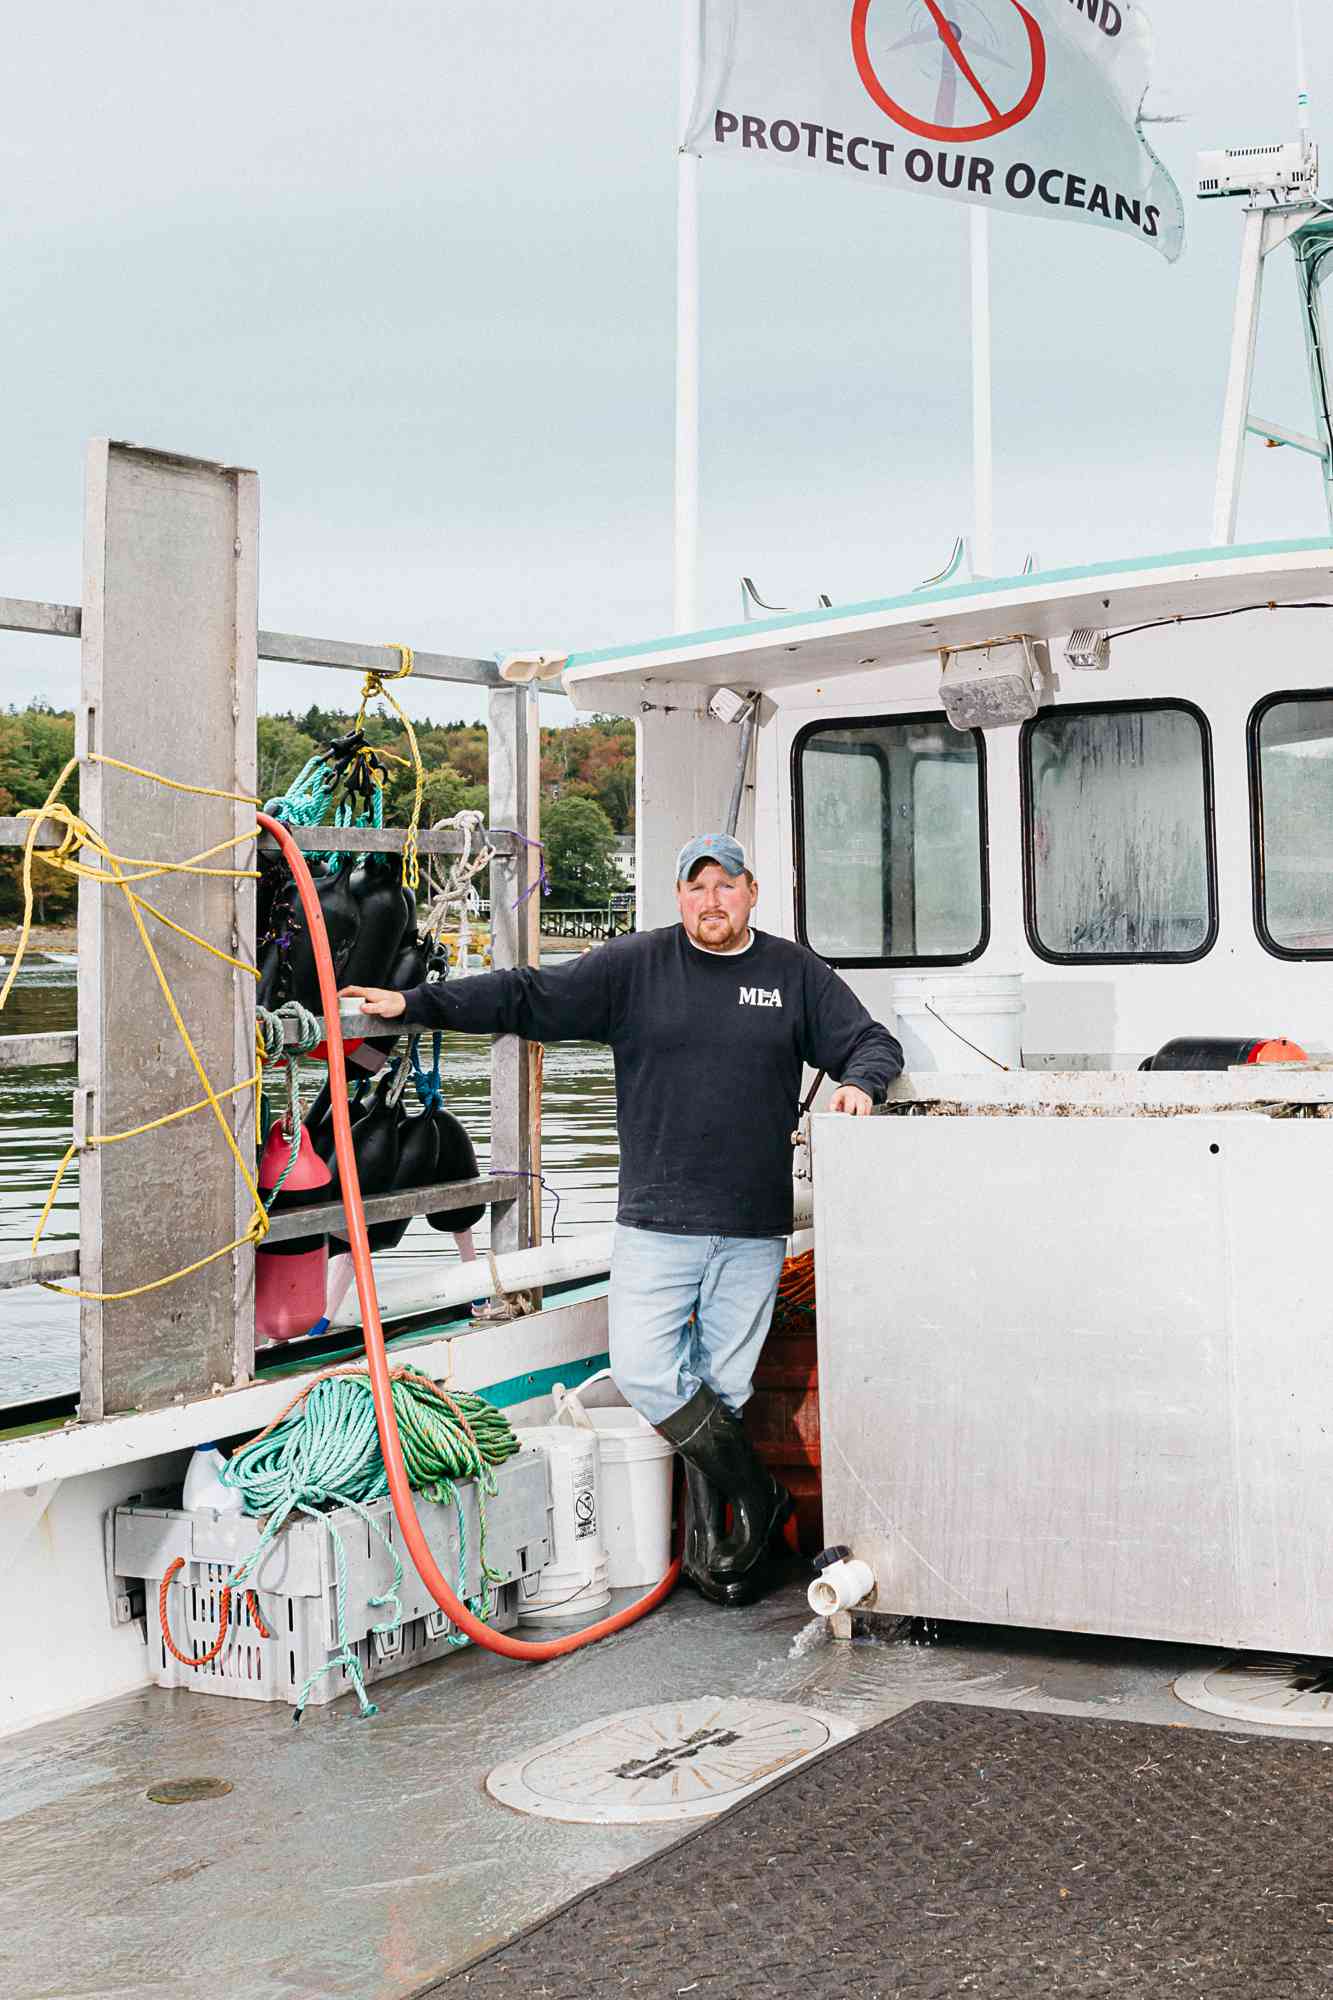 Captain Dustin Delano standing on the deck of a boat